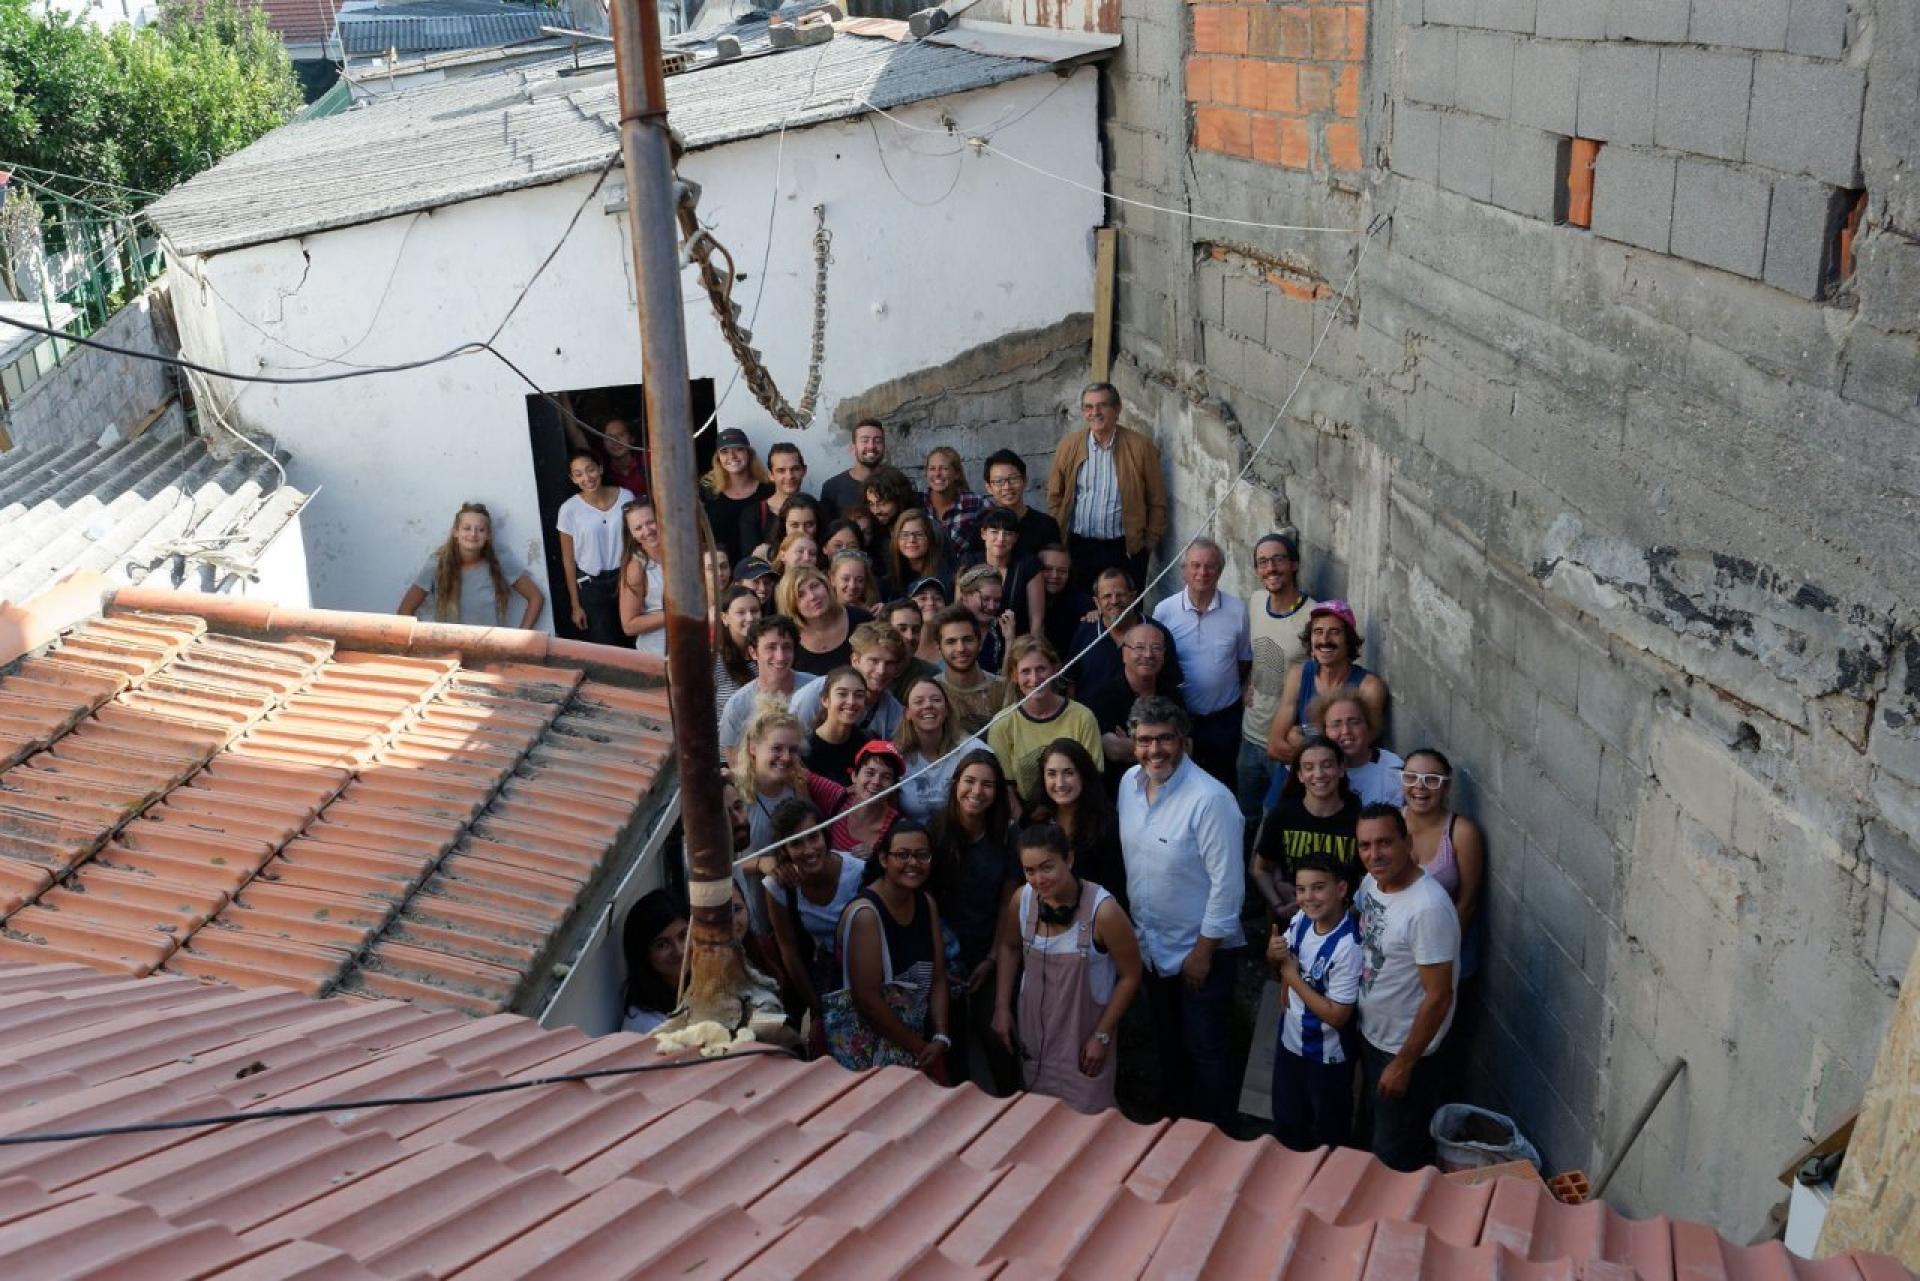 All participants in the backyard of renovated house. | Photo by Riccardo Bartali